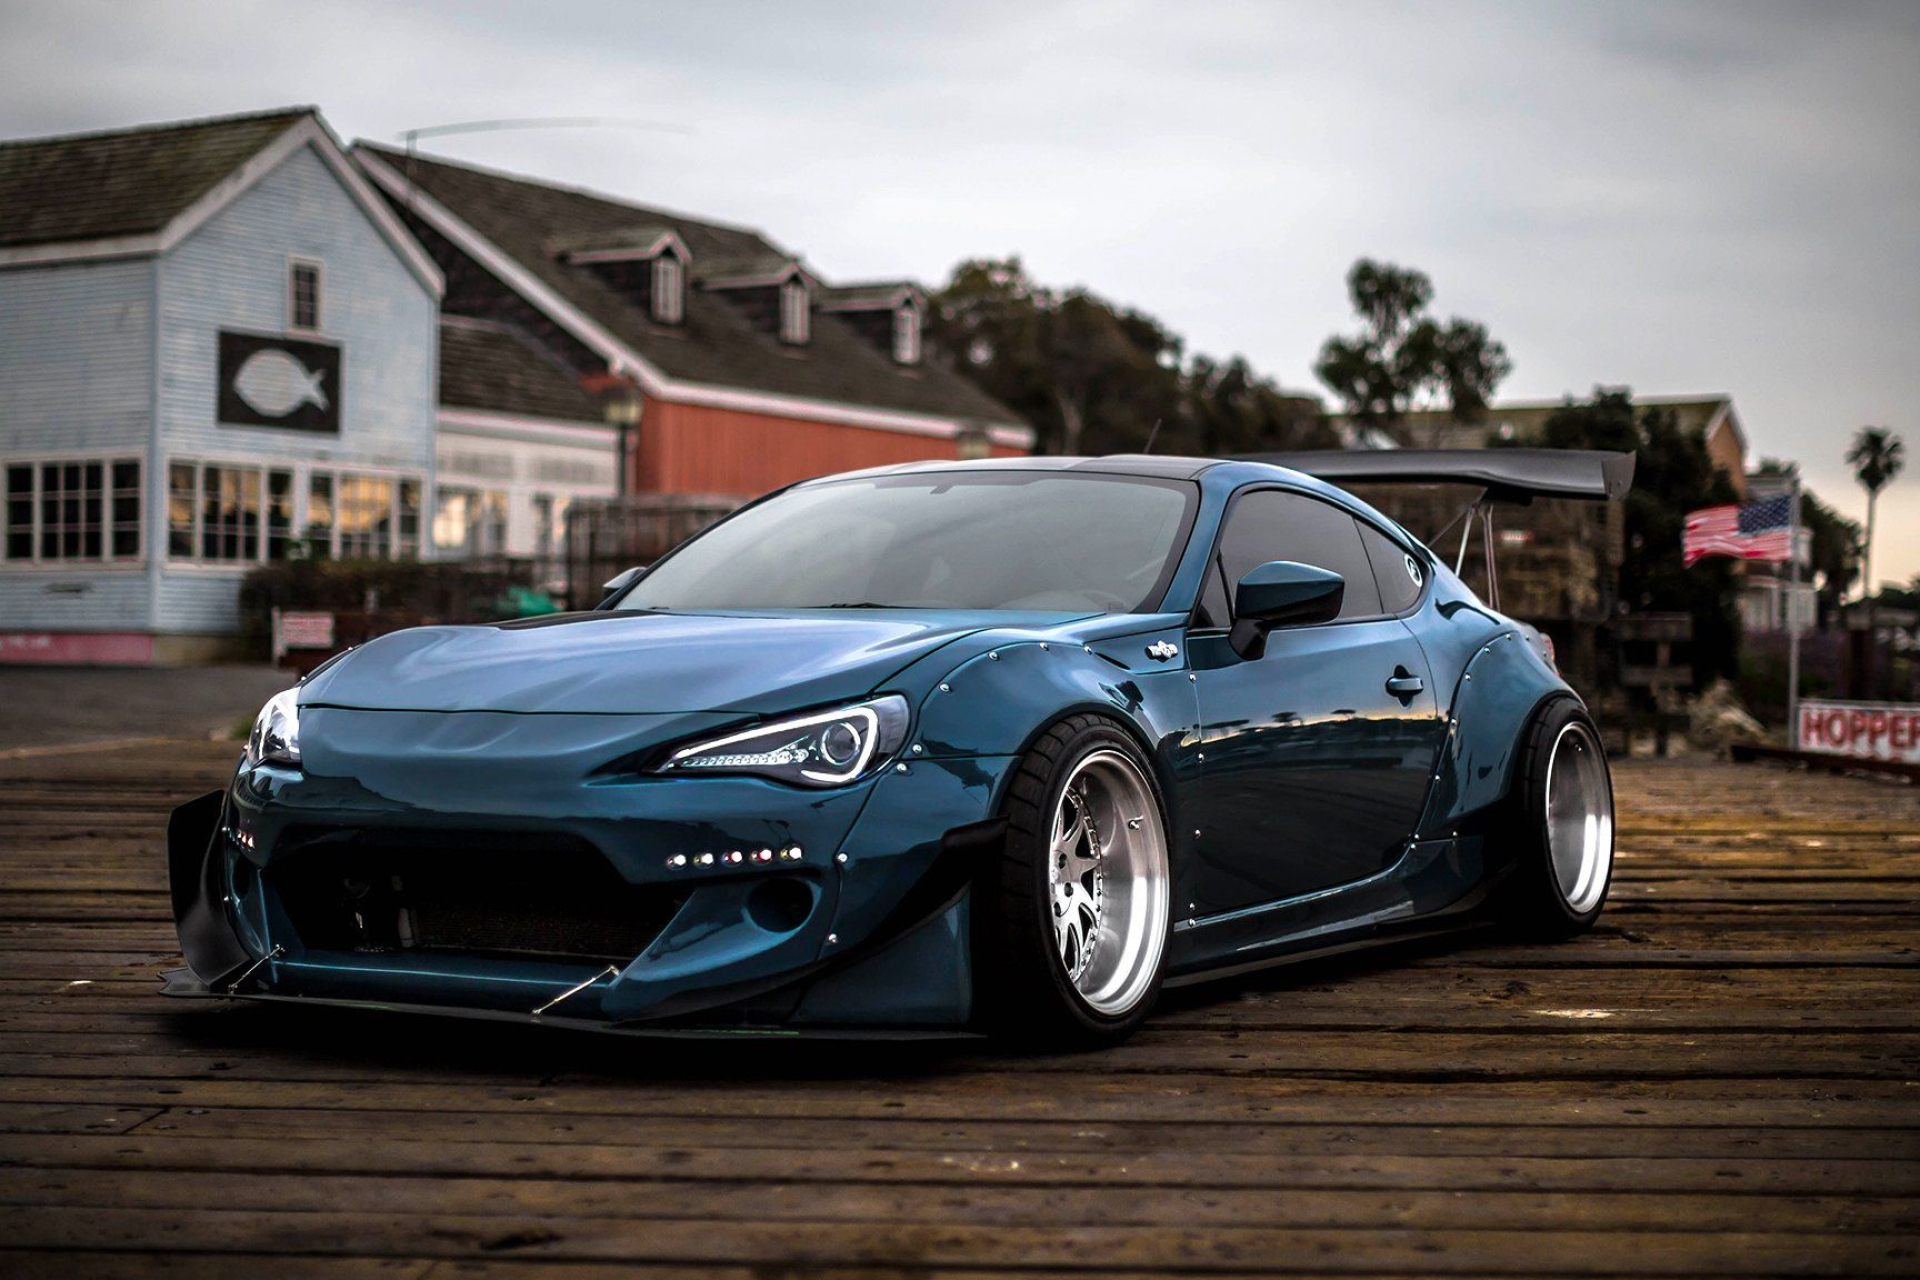 1920x1280 Scion FR-S with a Full Body Kit By Rocket Bunny and Aggressive Stance | Brz wide body kit, Scion, Brz car